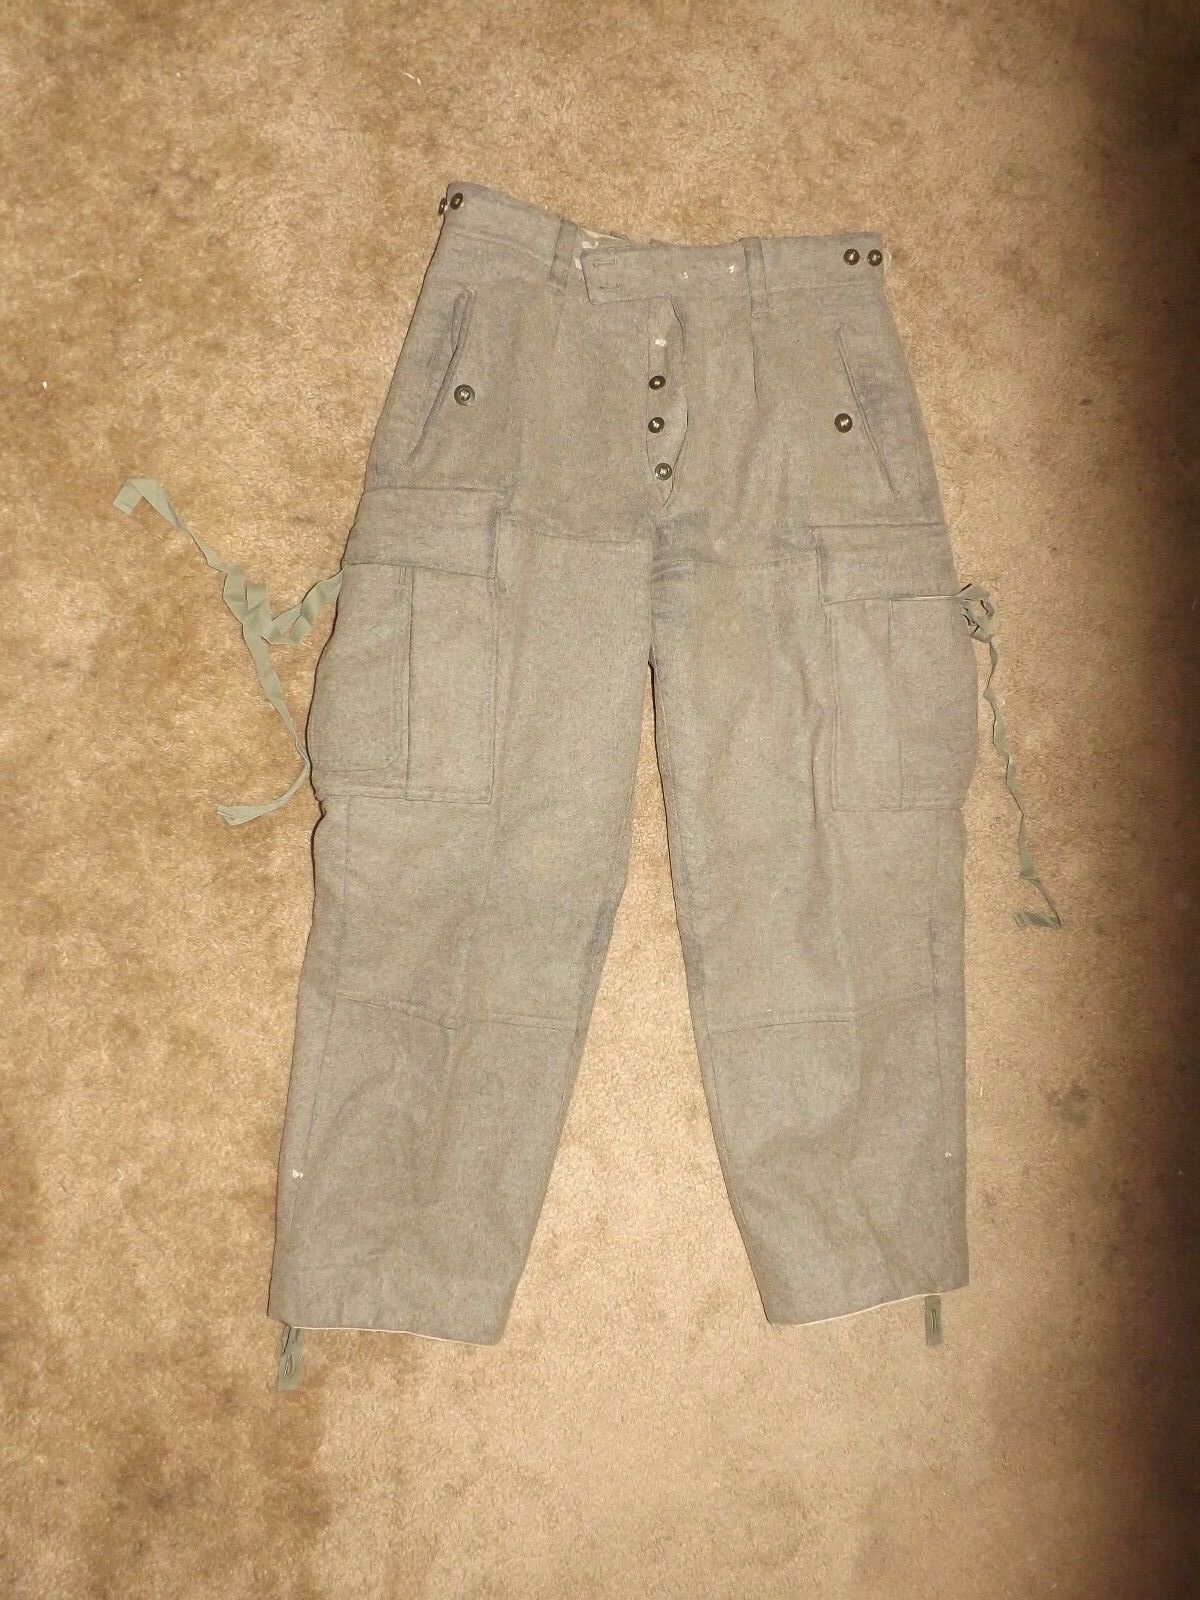 Primary image for MENS Vintage Alois Hot West German Military Wool Cargo Pants Size 31 X 26-
sh...